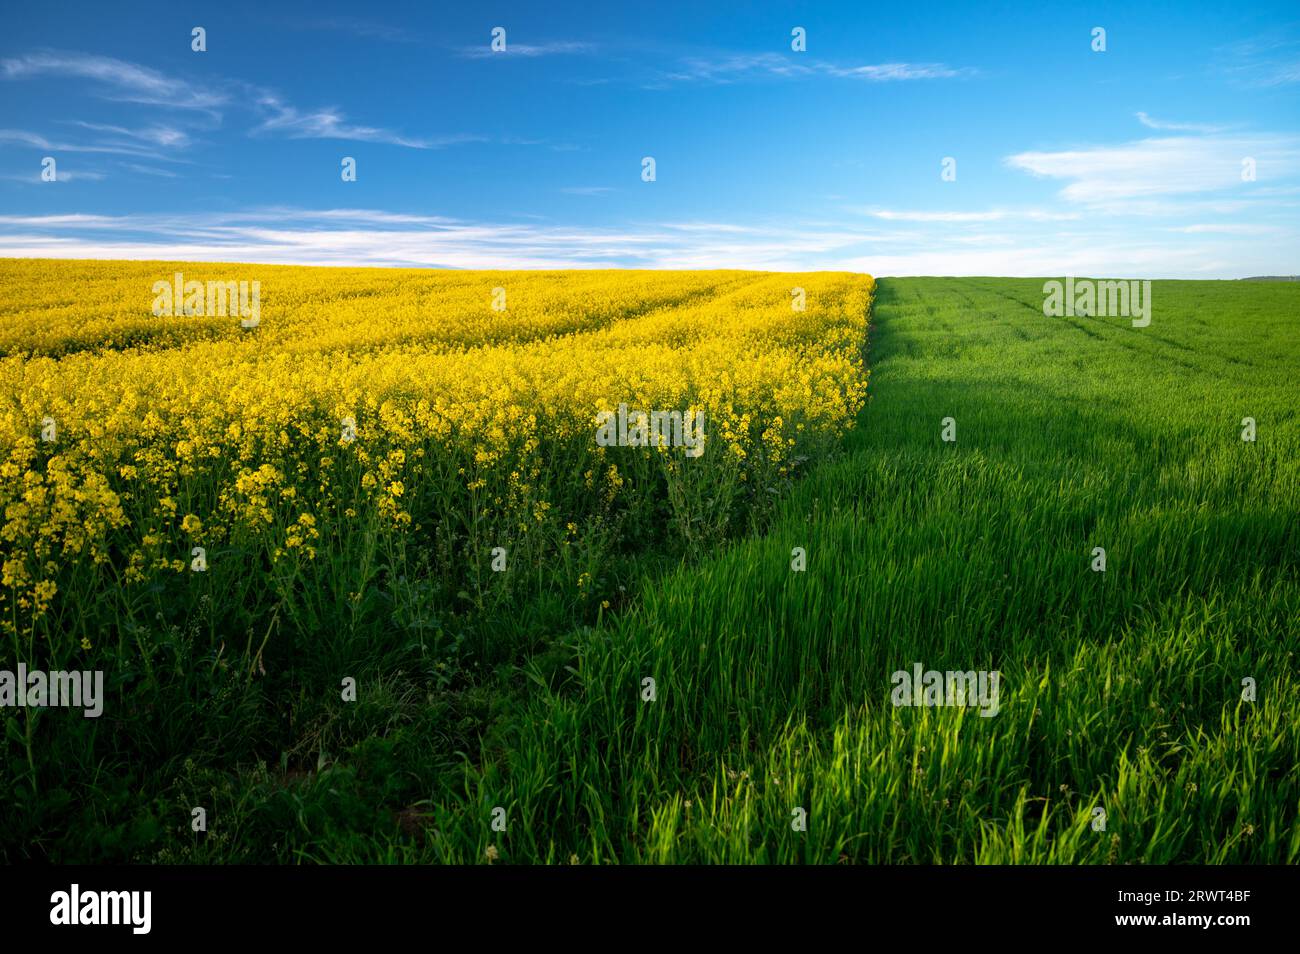 A Symphony of Spring: Rapeseed and Wheat Fields Bursting with Life Stock Photo